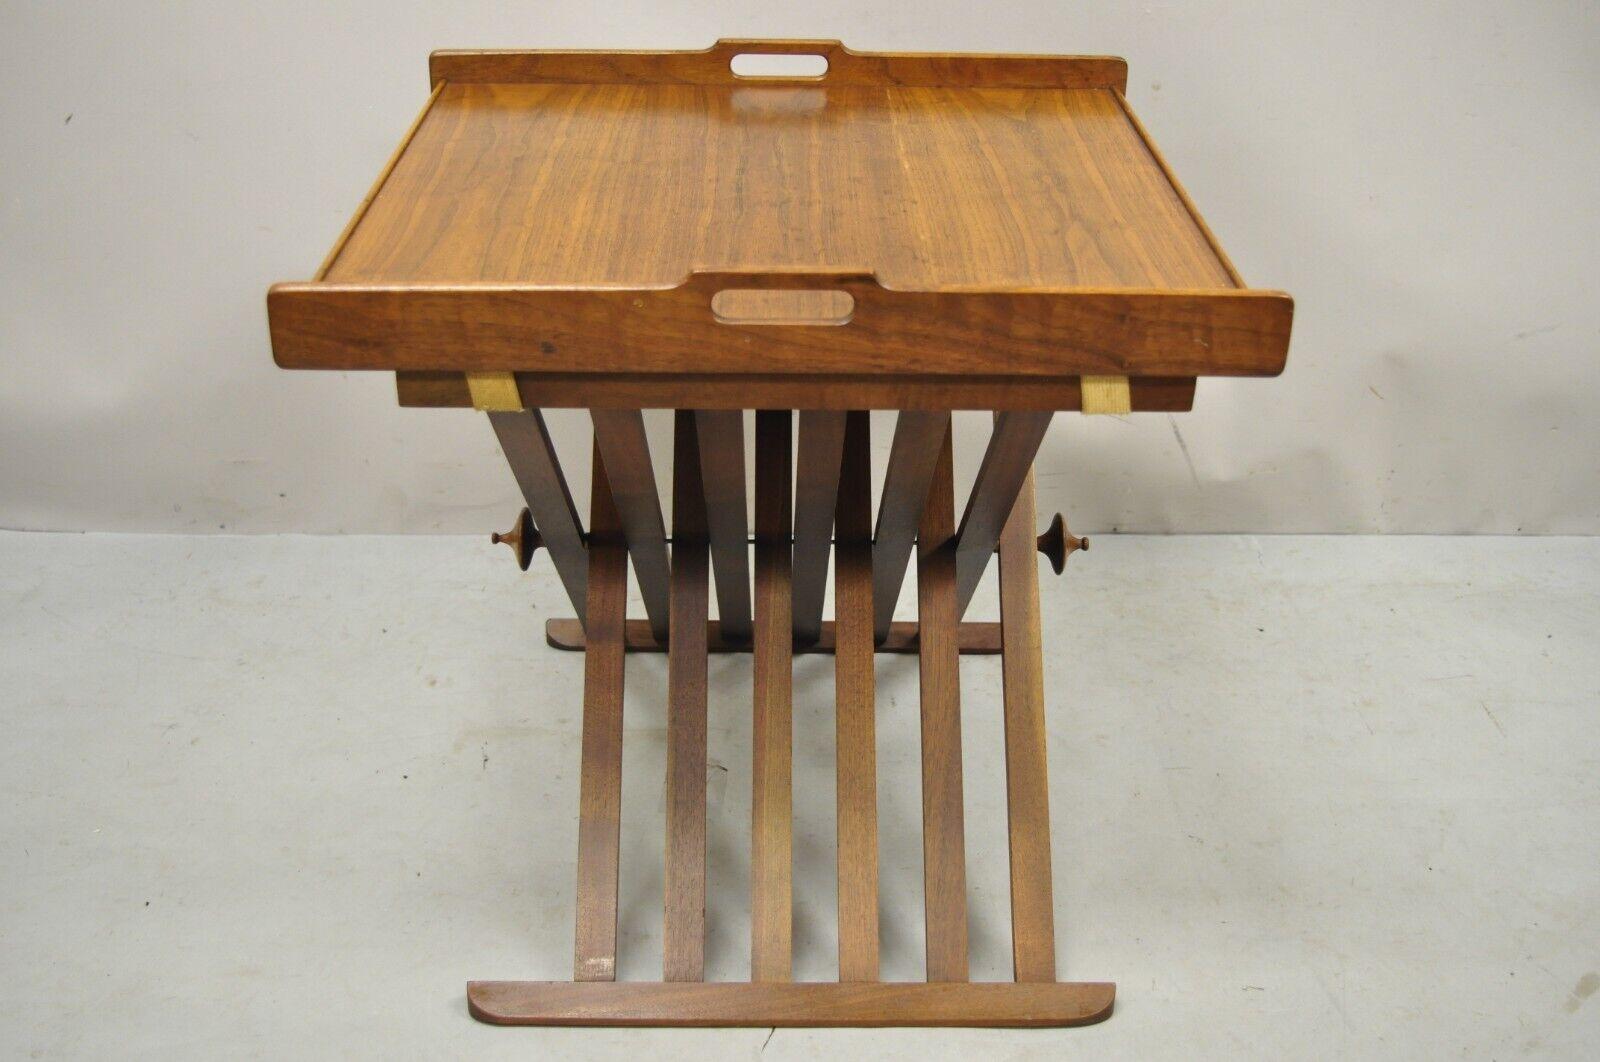 Stewart MacDougall Kipp Stewart Drexel Walnut Folding Campaign Table (A). Item features a removable tray top, folding X-form base, carved finials. Circa mid 20th century. Measurements: 20